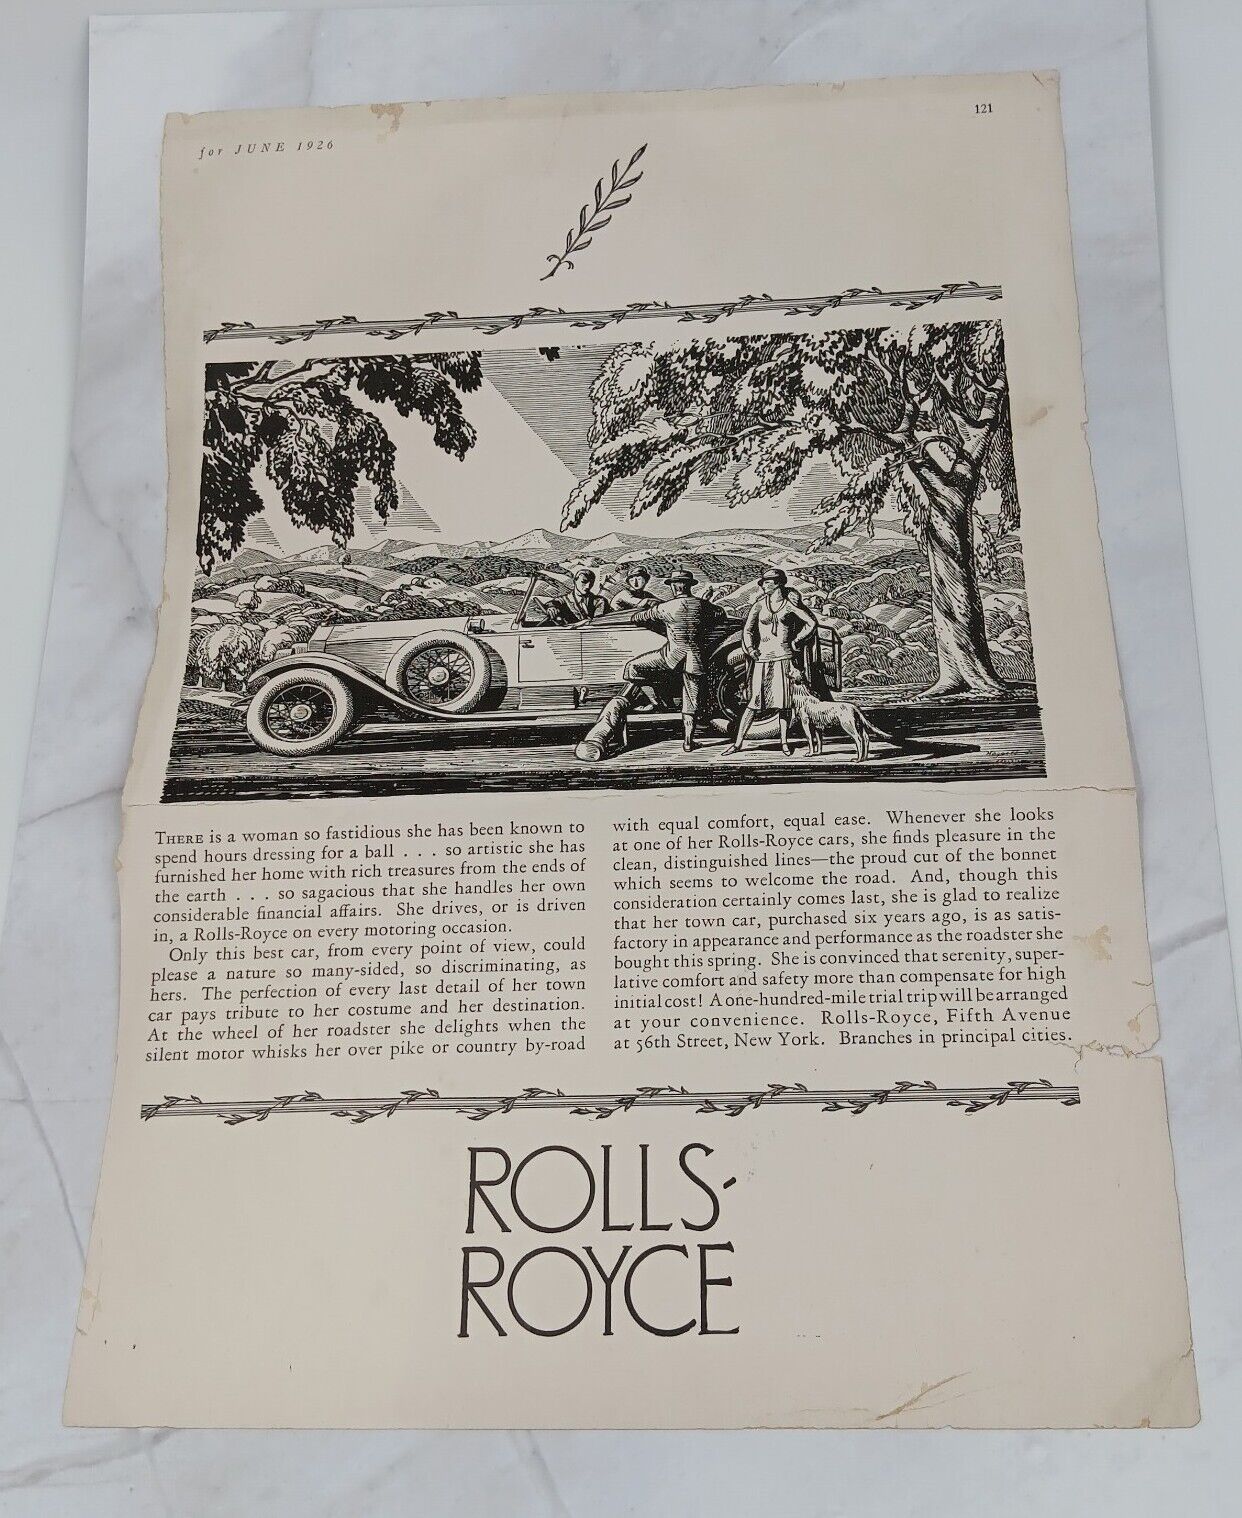 1929 Rolls-Royce Ad From Harper\'s Bazaar  Magazine 1 Page Torn Out Black & White